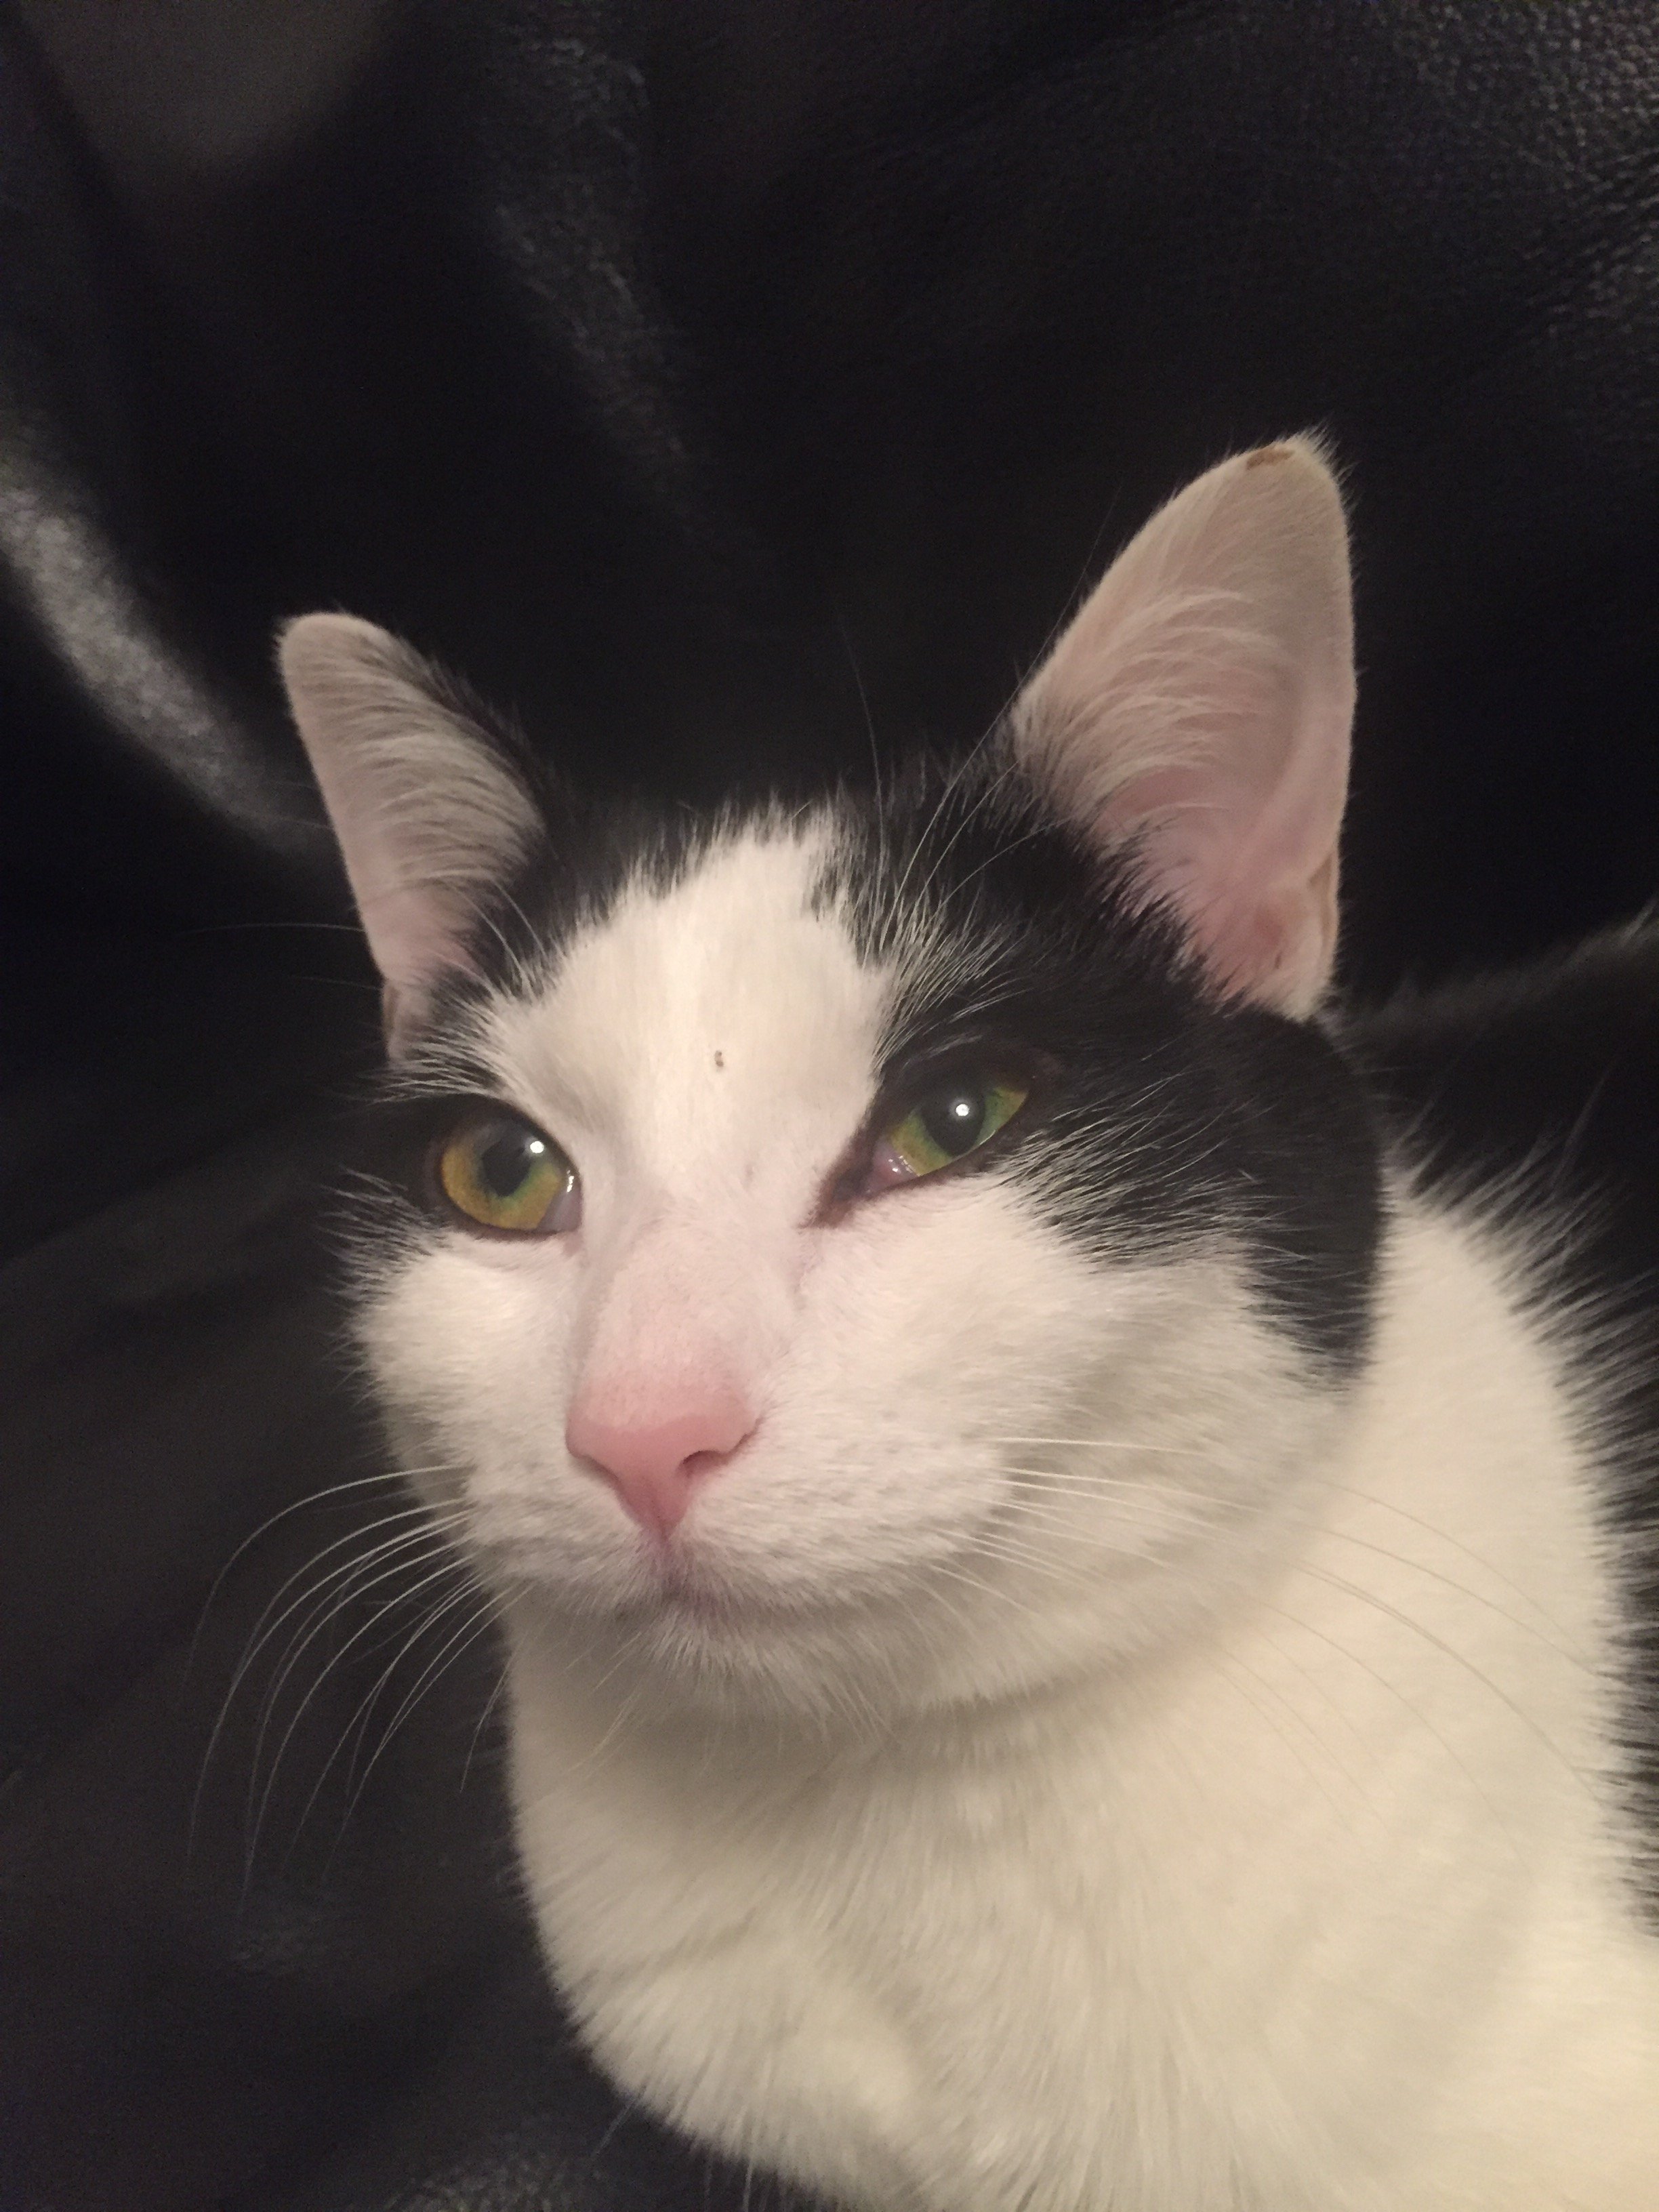 My Cat Is Squinting One Eye What Can I Do To Help? Cat eye problems